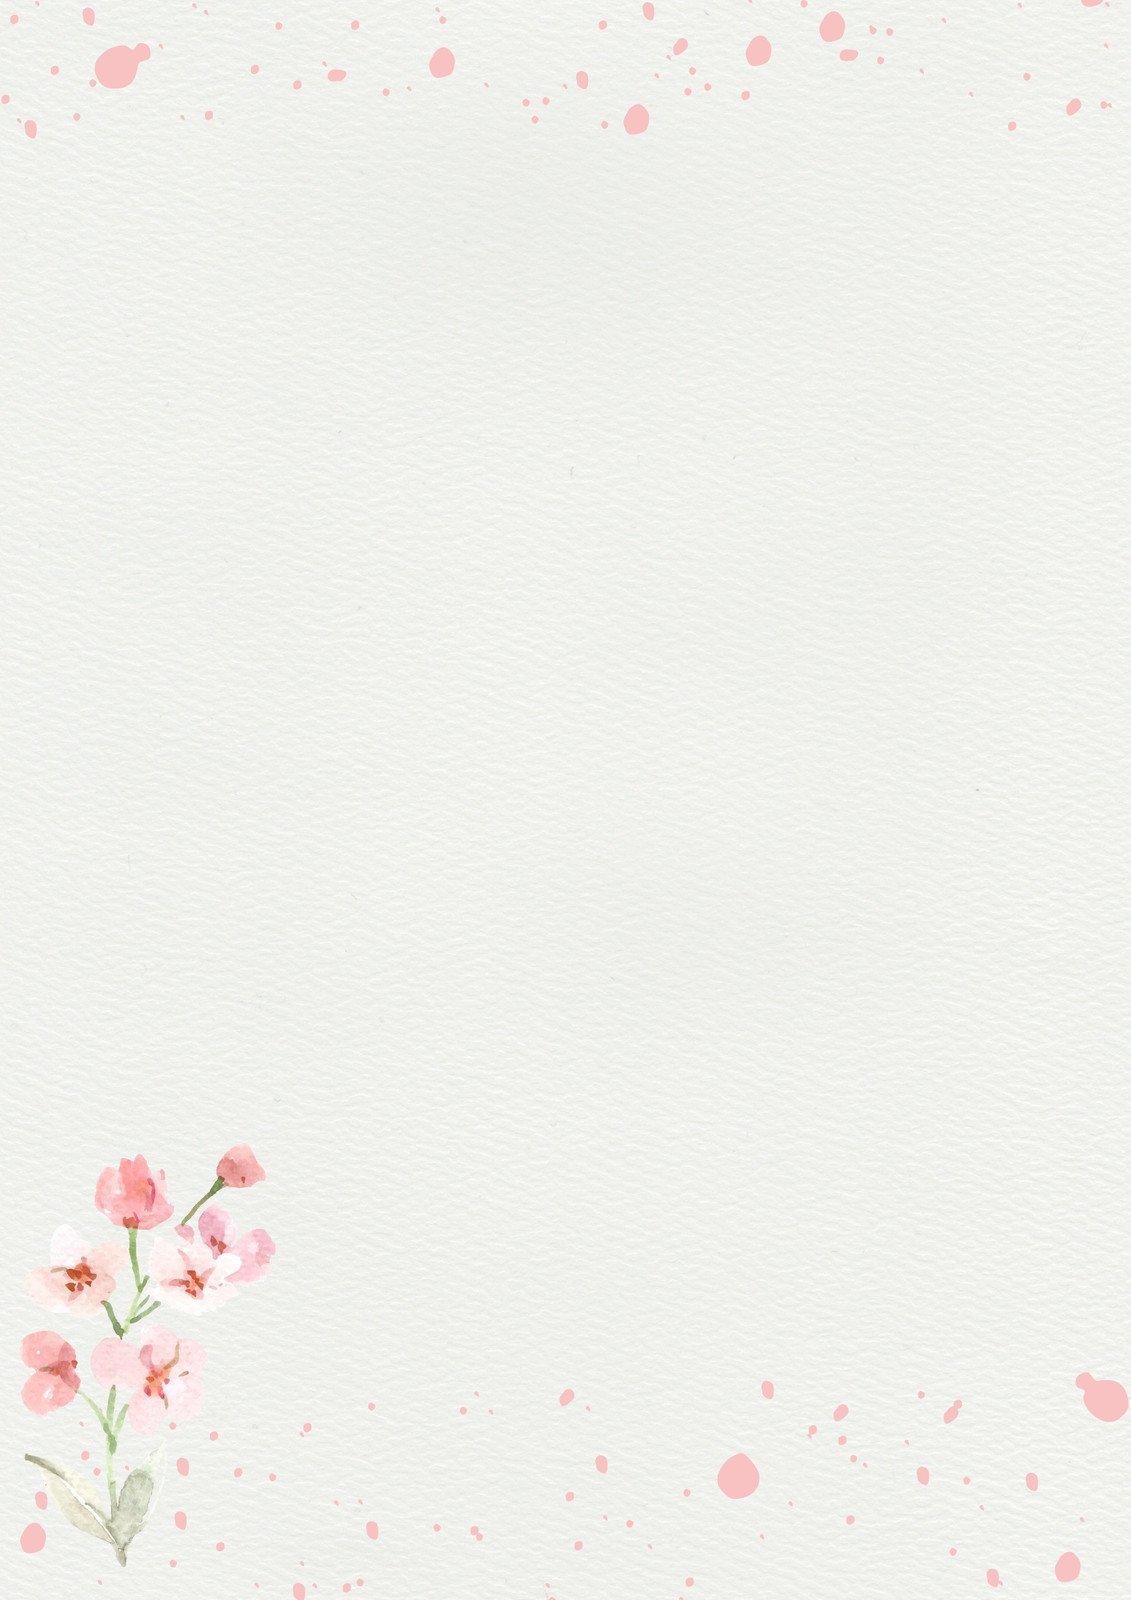 pink and white background images